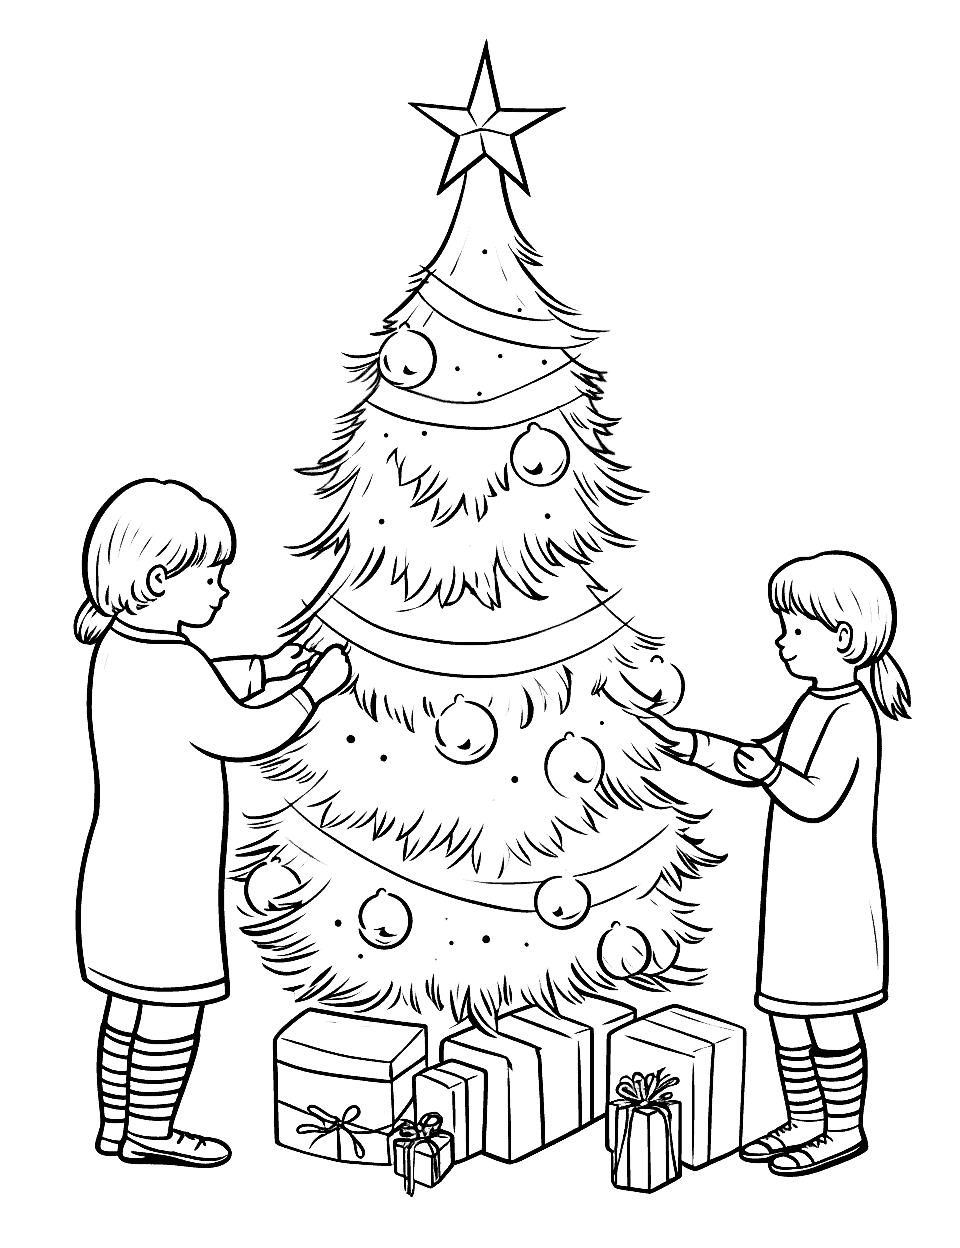 Trimming the Tree Christmas Coloring Page - A family working together to trim the Christmas tree with ornaments and tinsel.